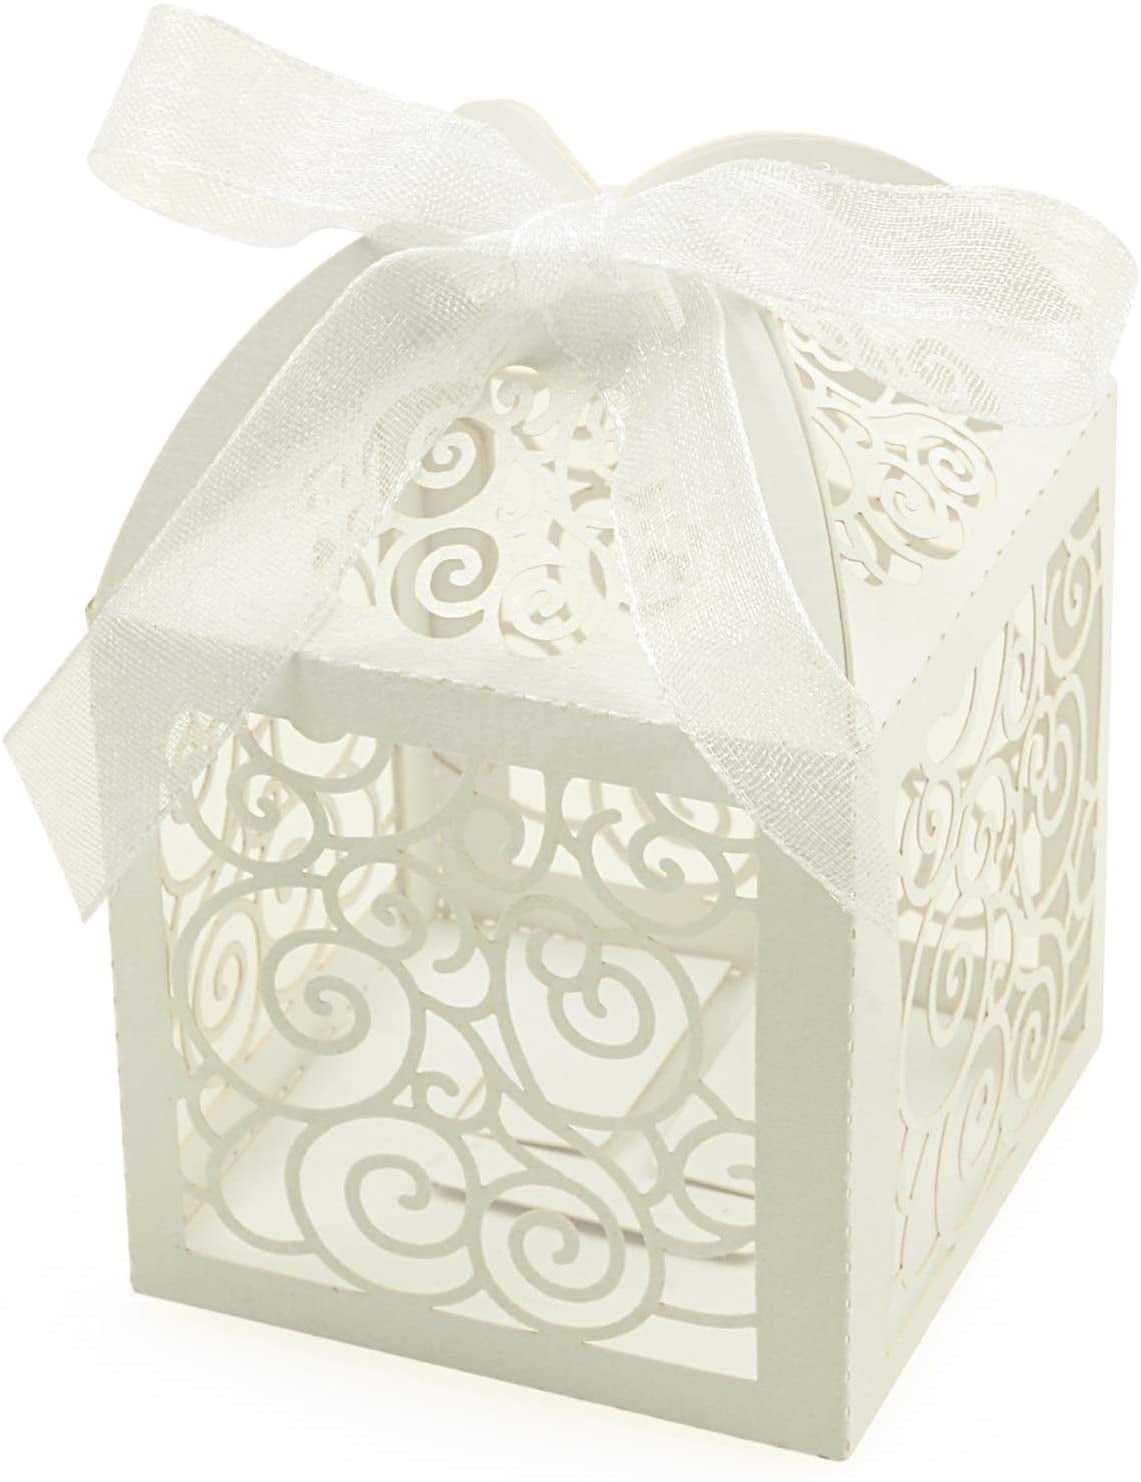 Laser Cut Candy Box Wedding Favor Gift Boxes for Bridal Shower Anniverary Birthd 